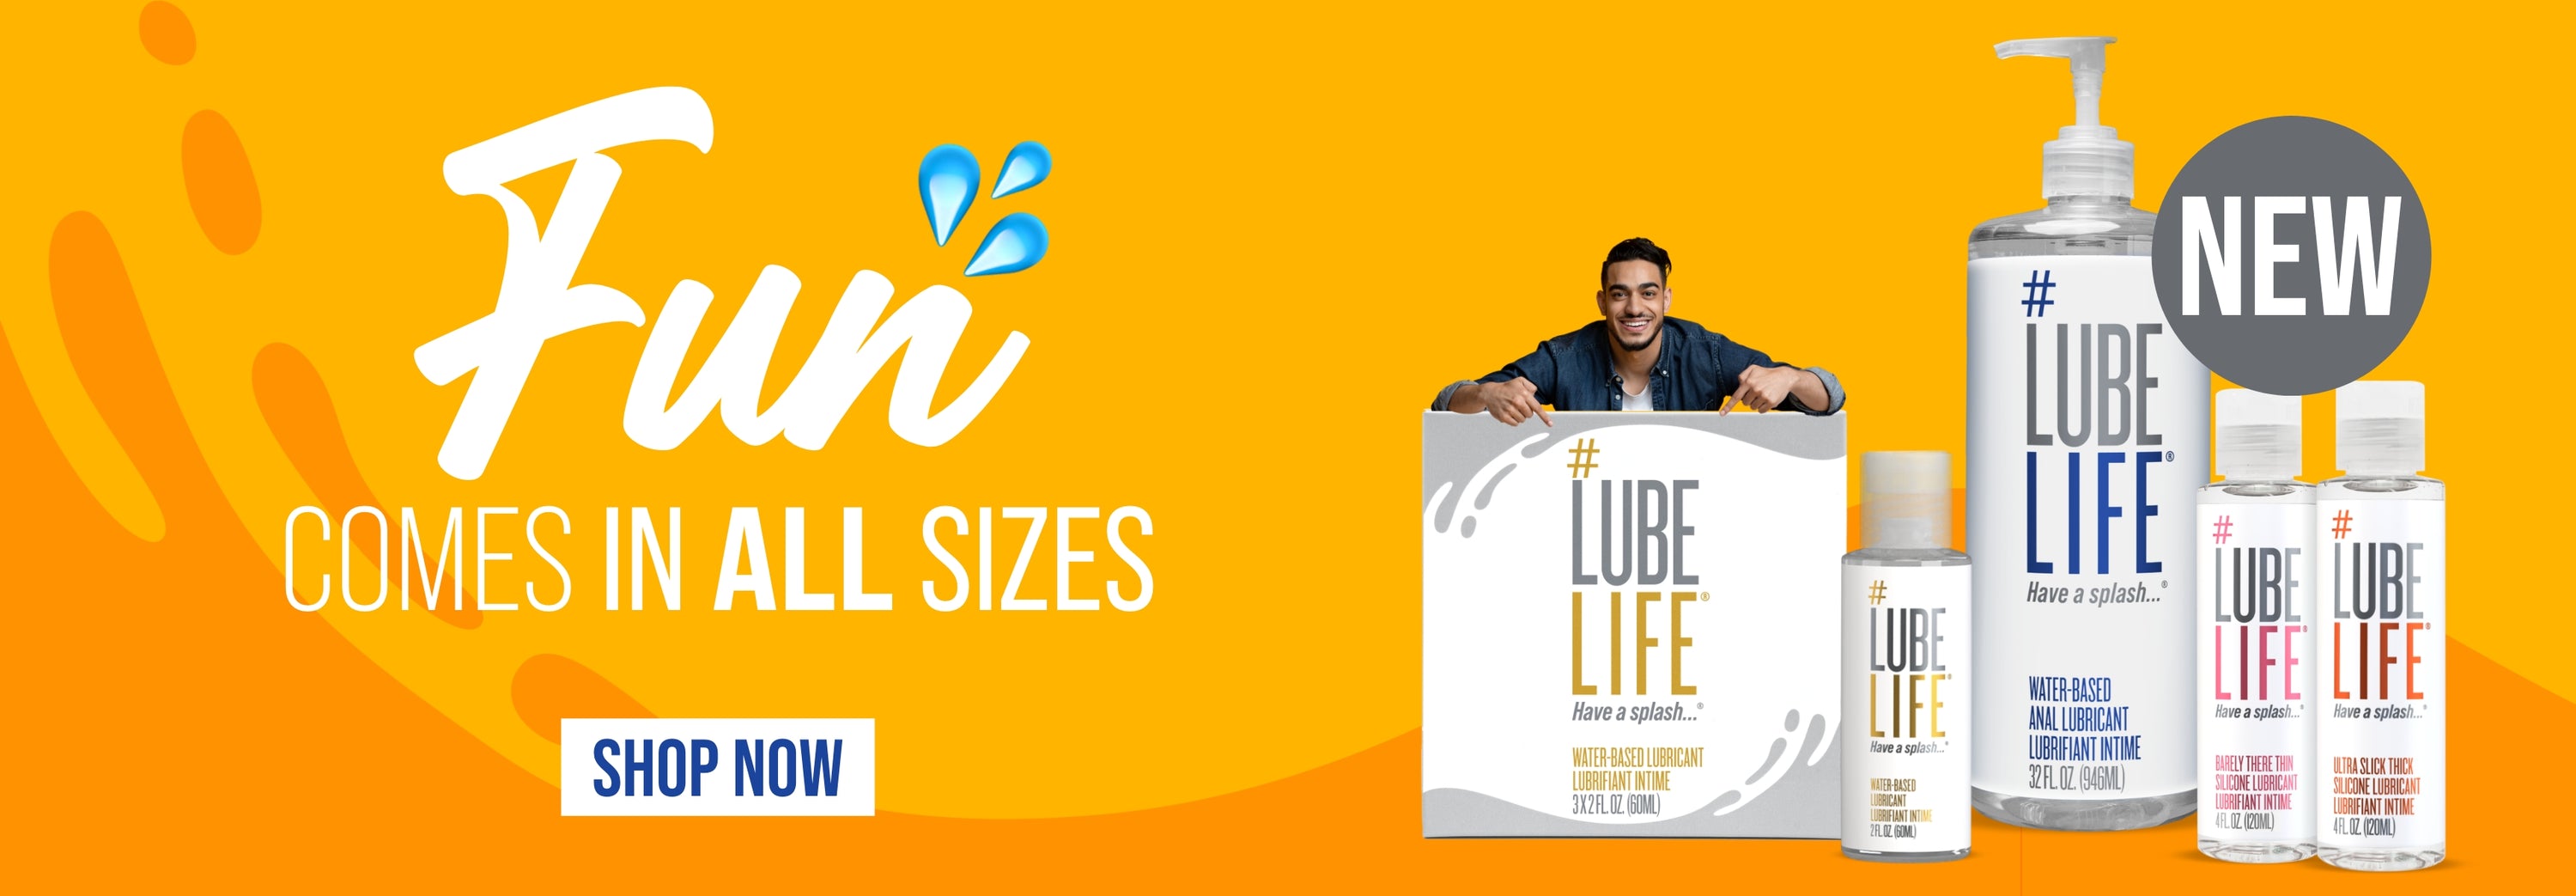 Best Water-Based, Silicone-Based & Flavored Lubricants – #Lubelife